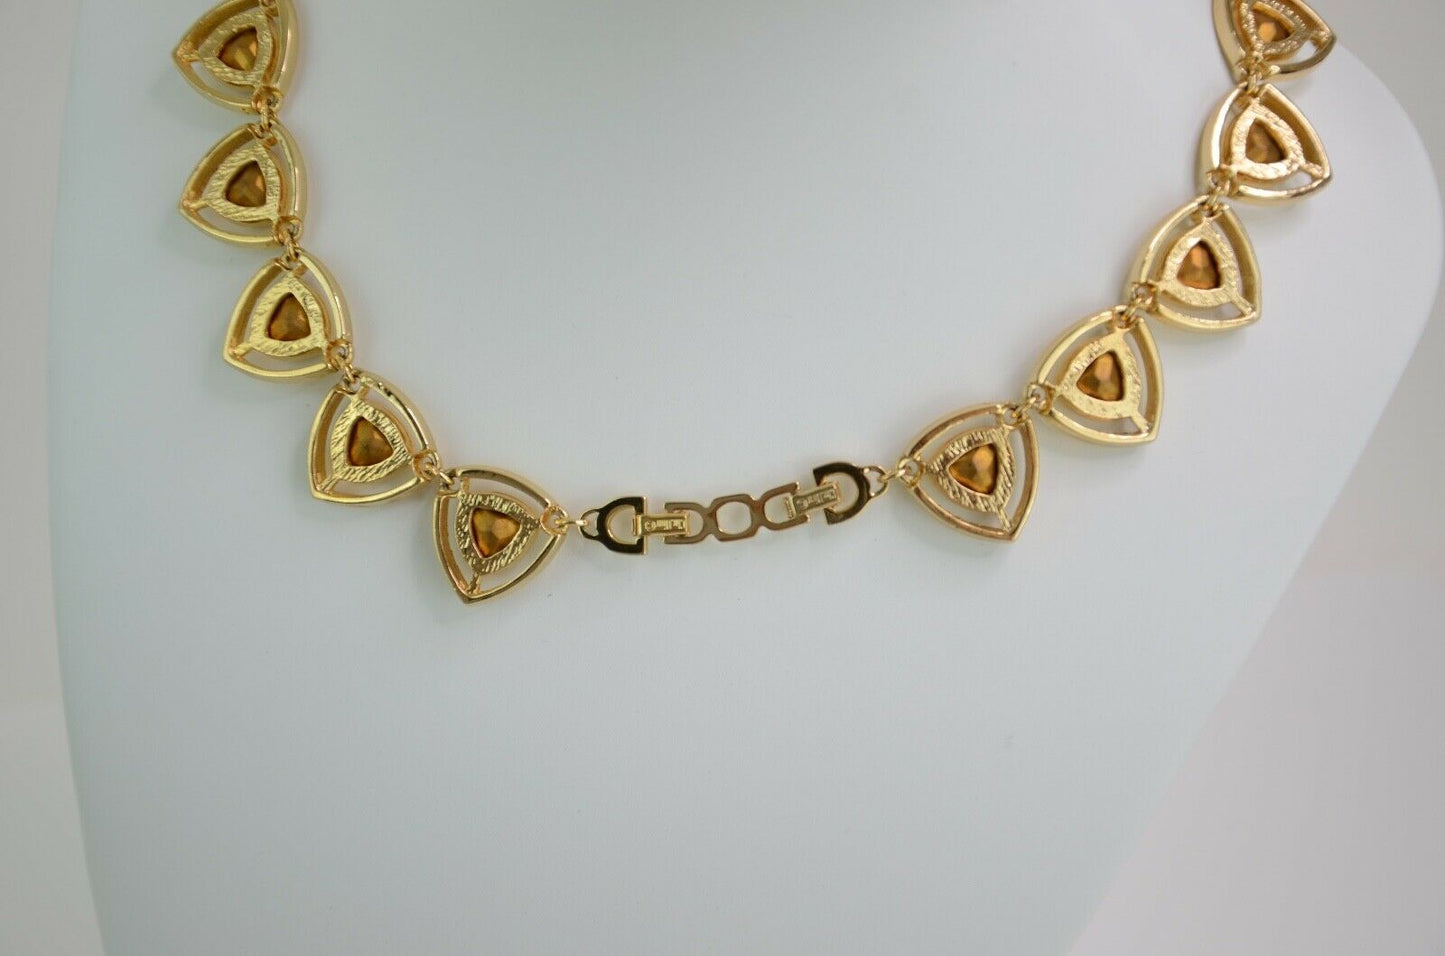 【SOLD OUT】Christian Dior Gold Tone Triangle Link Choker Necklace Rhinestone Vintage